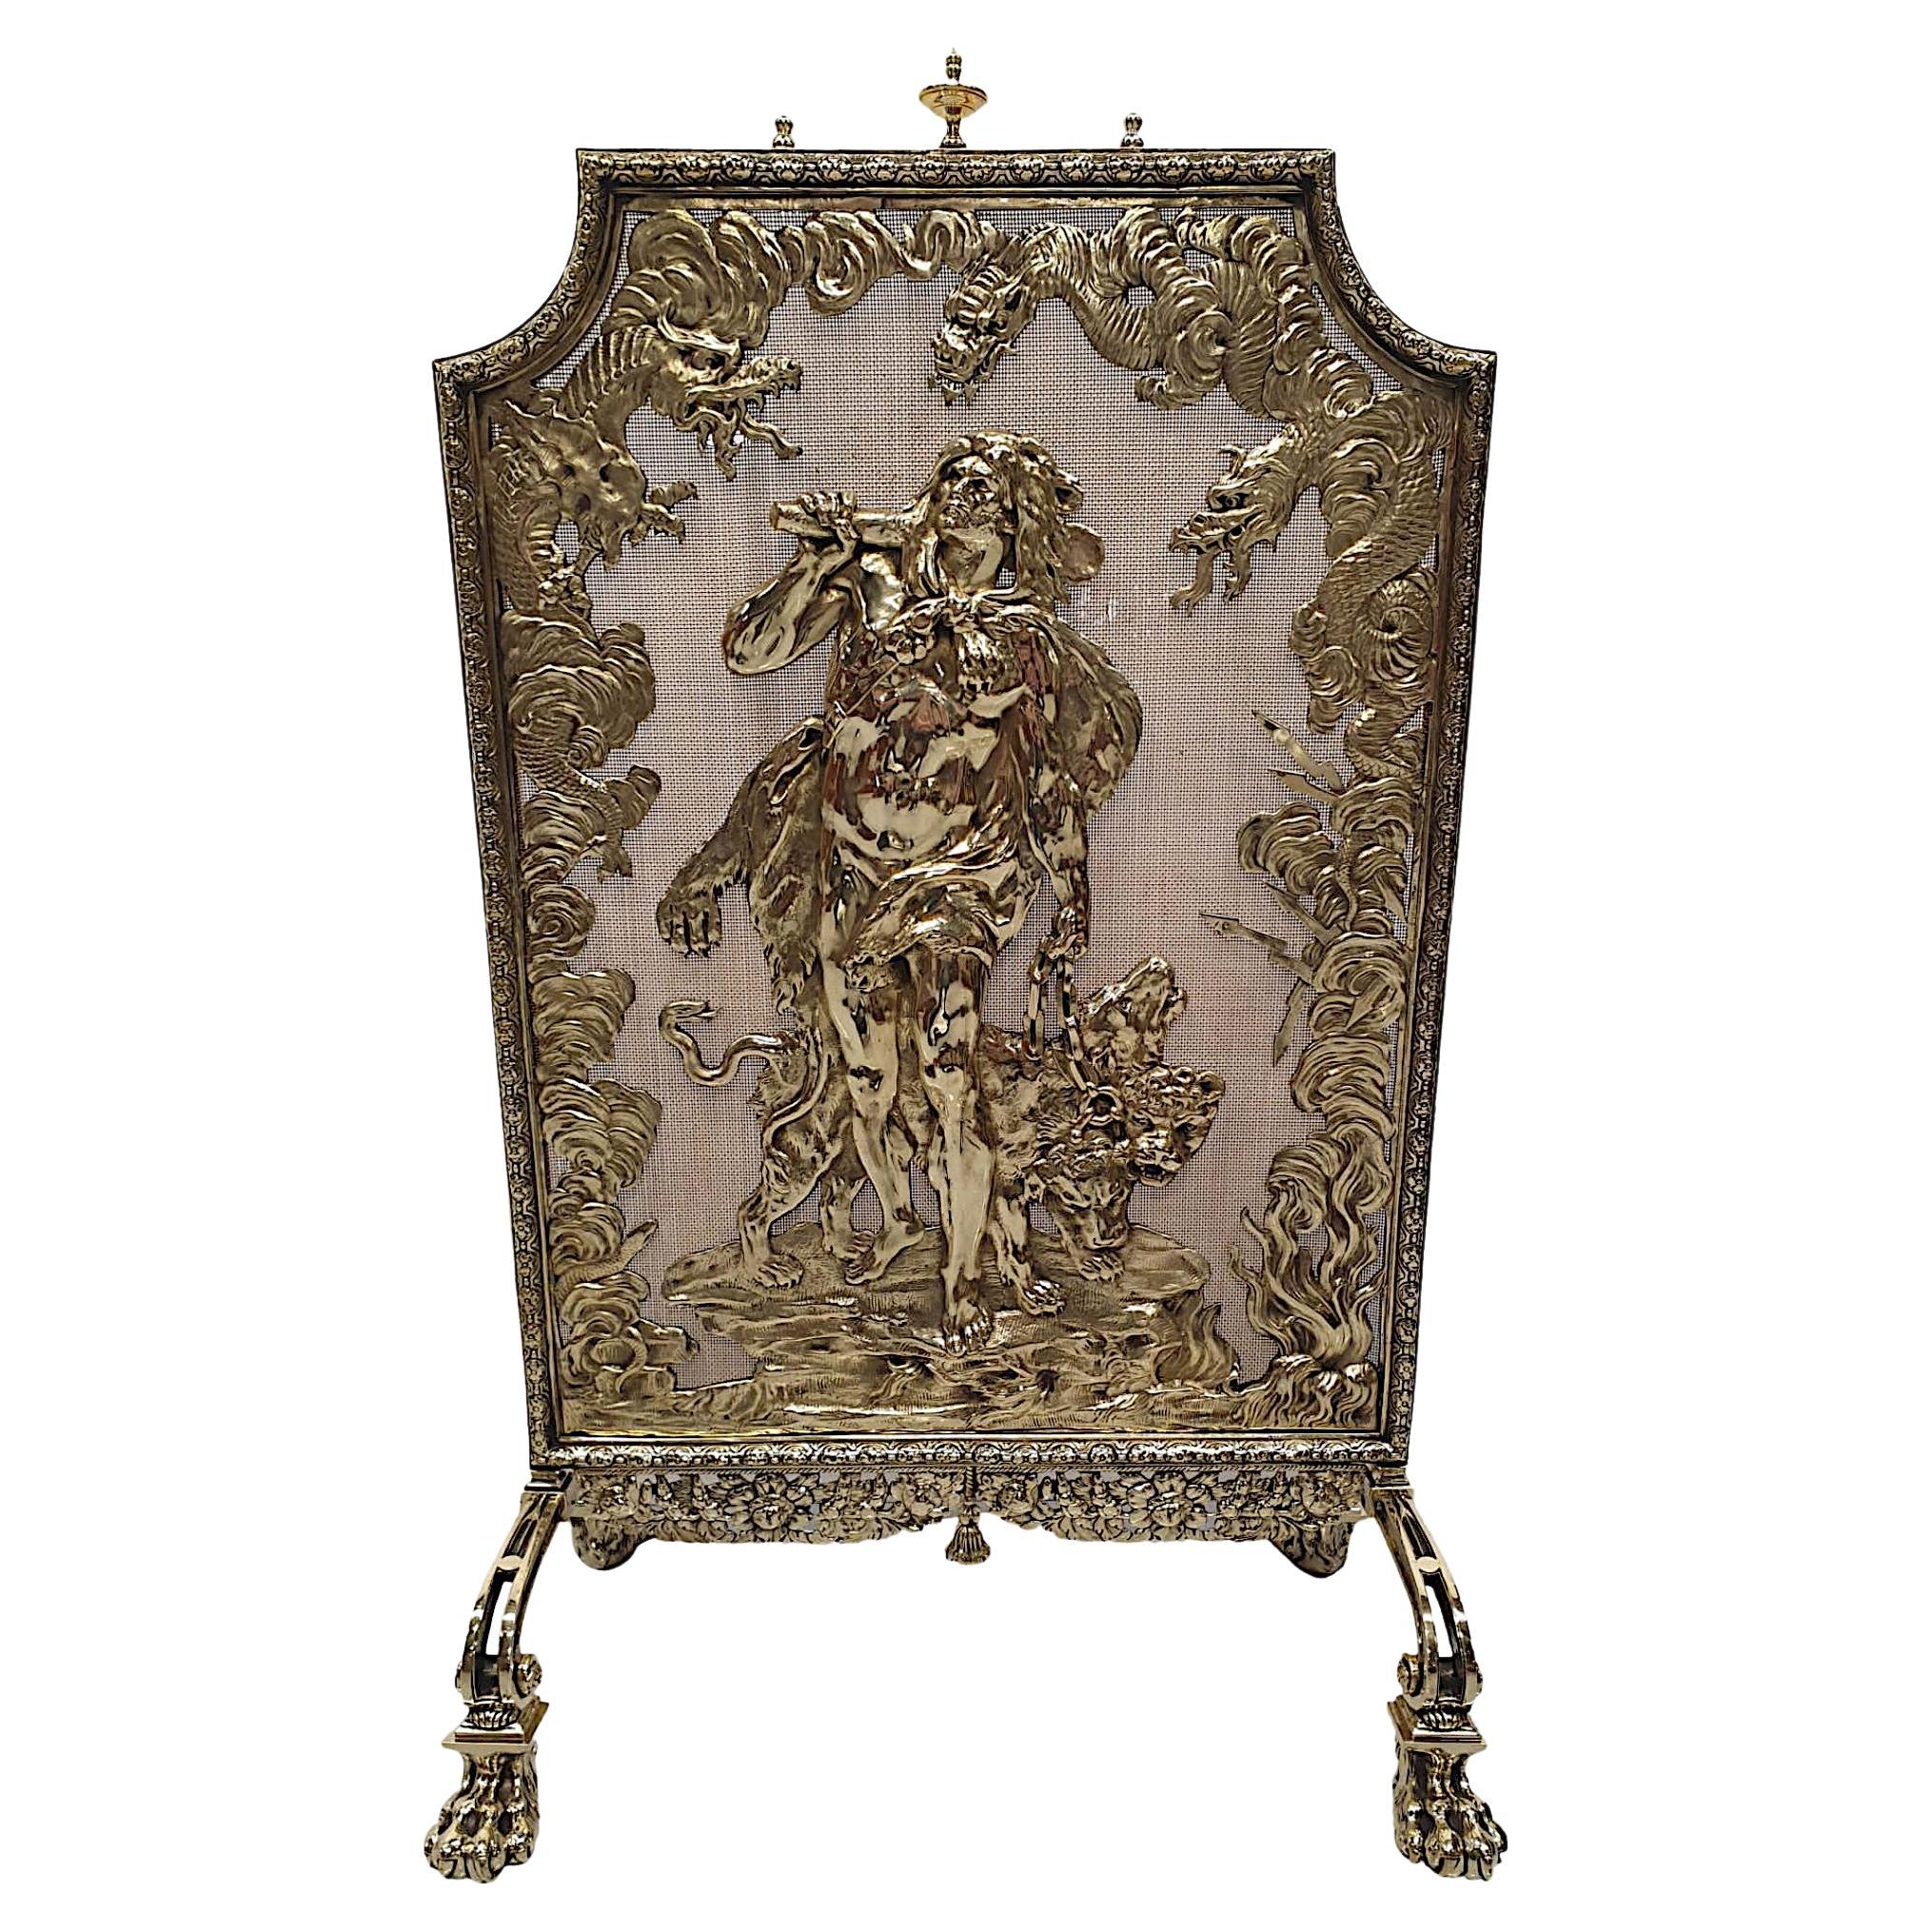 Very Rare and Fine Large 19th Century Brass Fire Screen